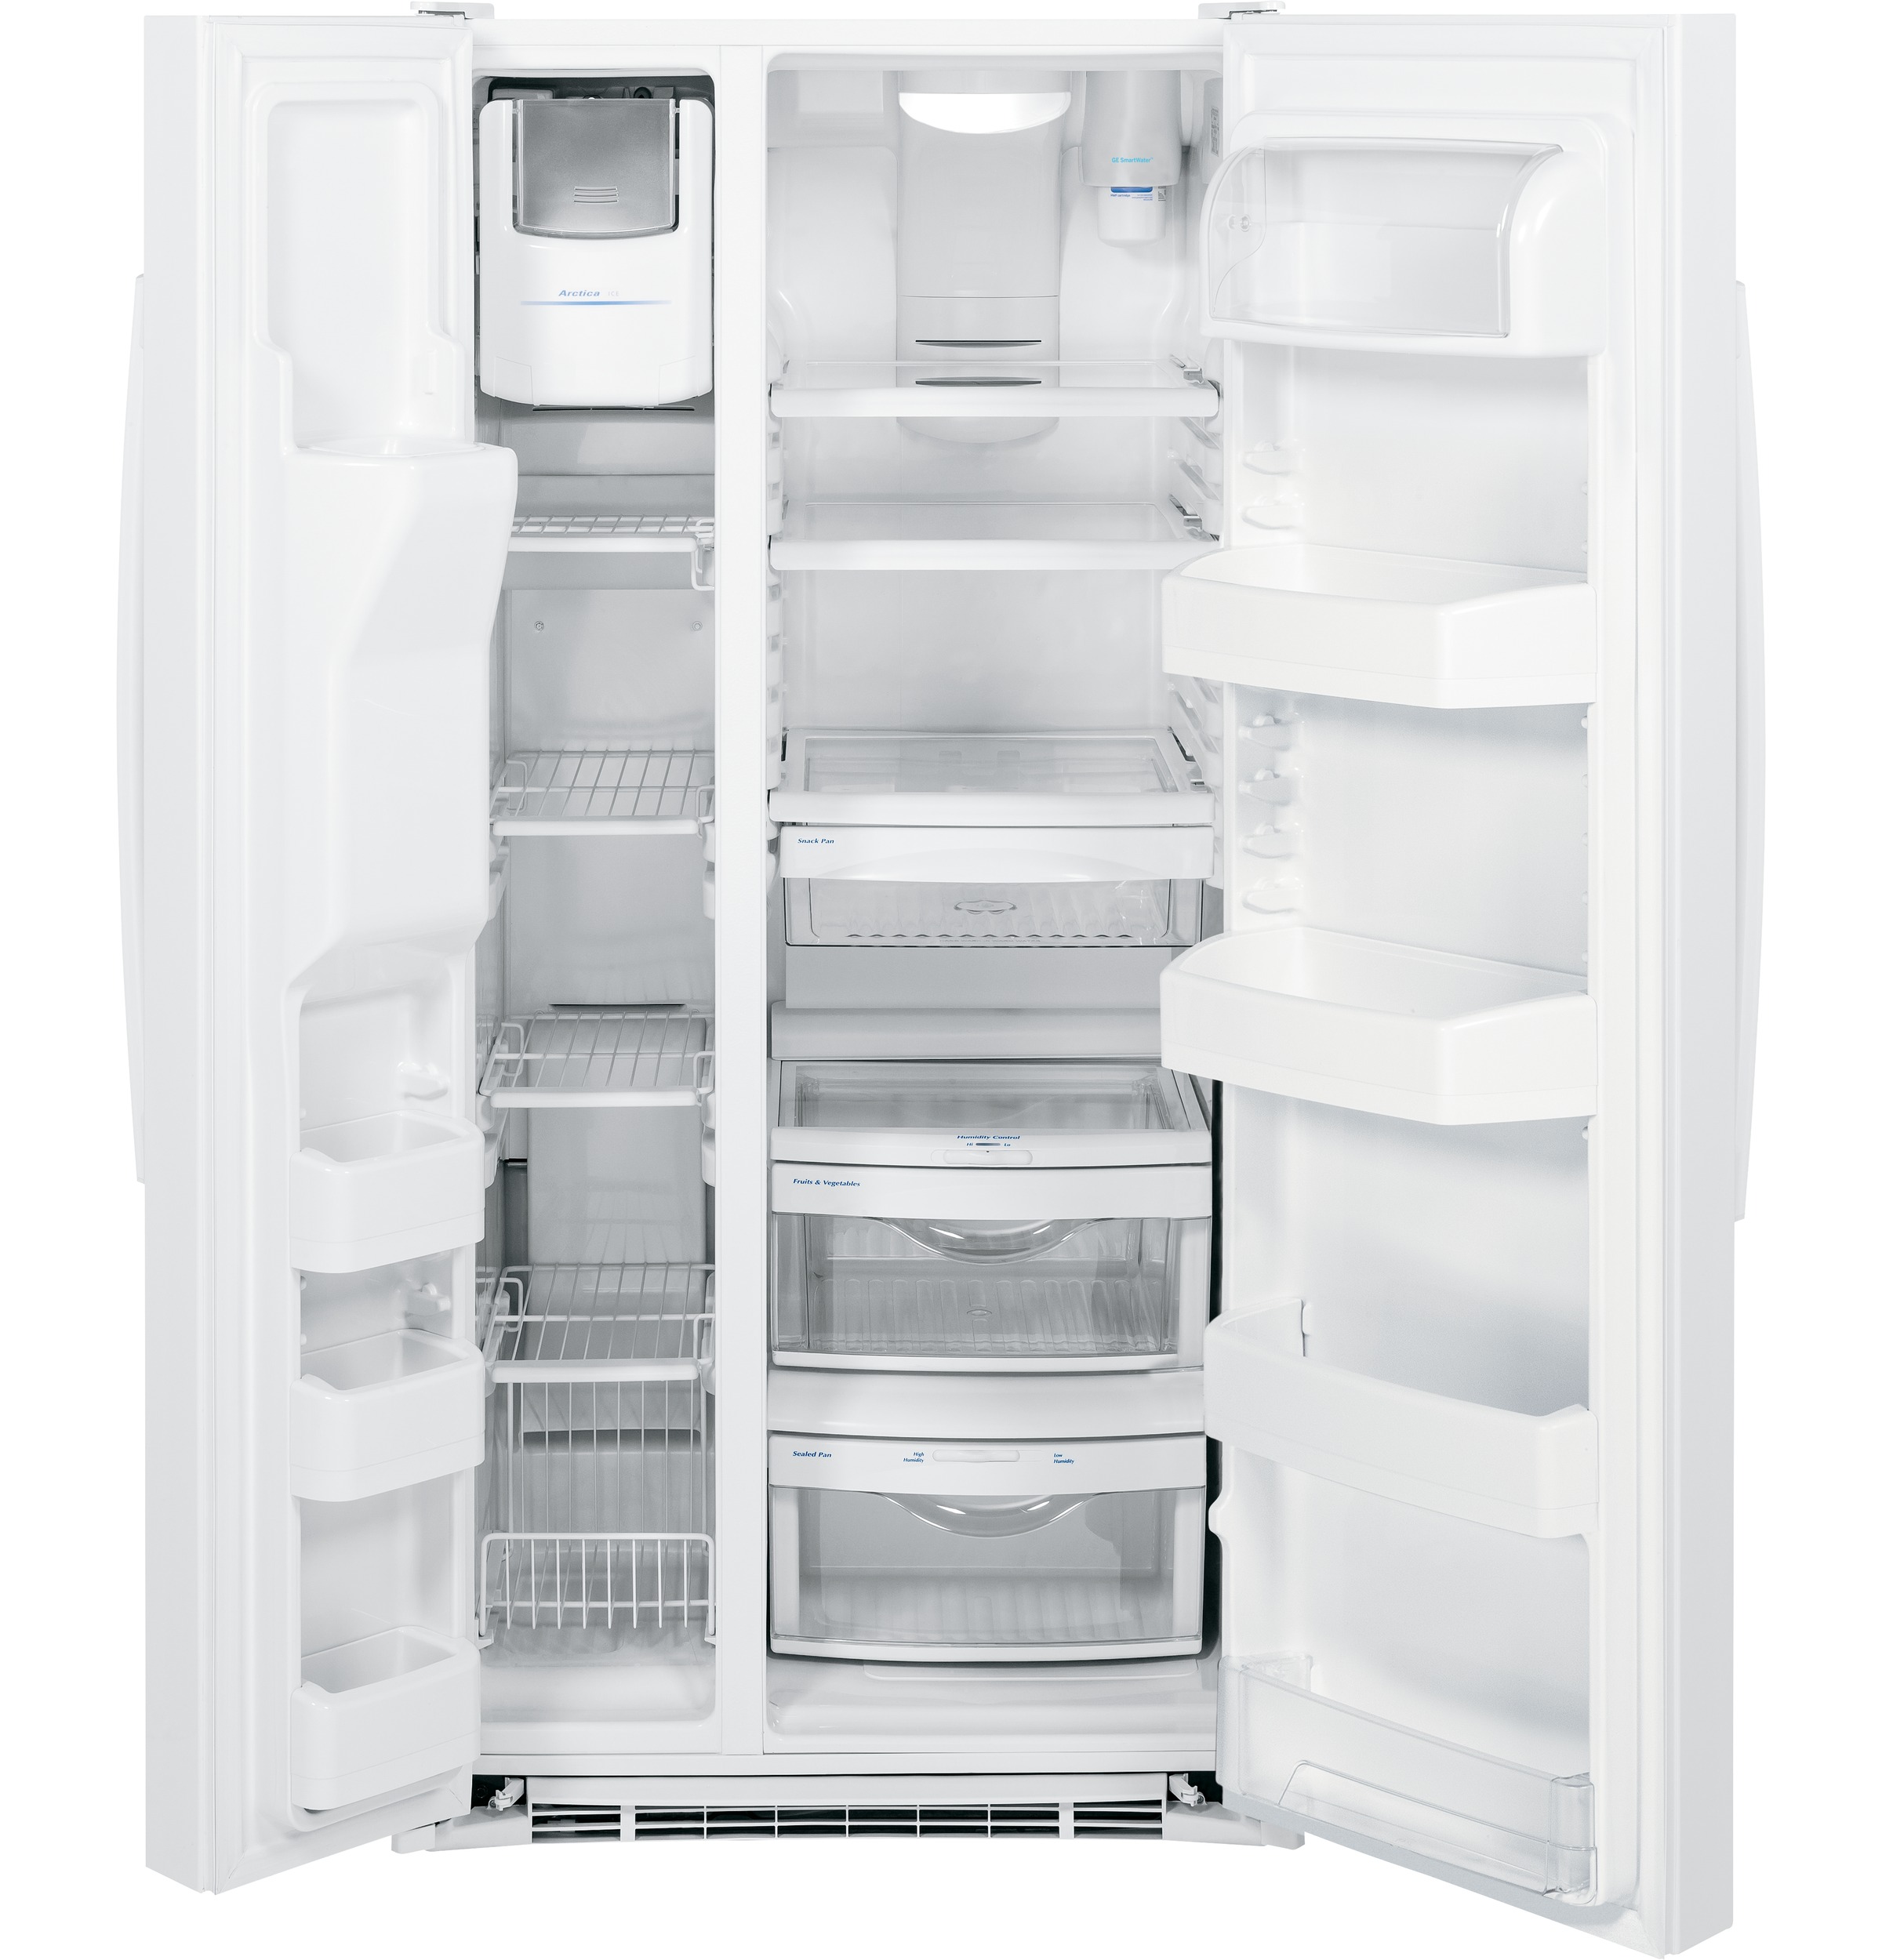 Customer Reviews: GE 22.5 Cu. Ft. Frost-Free Side-by-Side Refrigerator ...